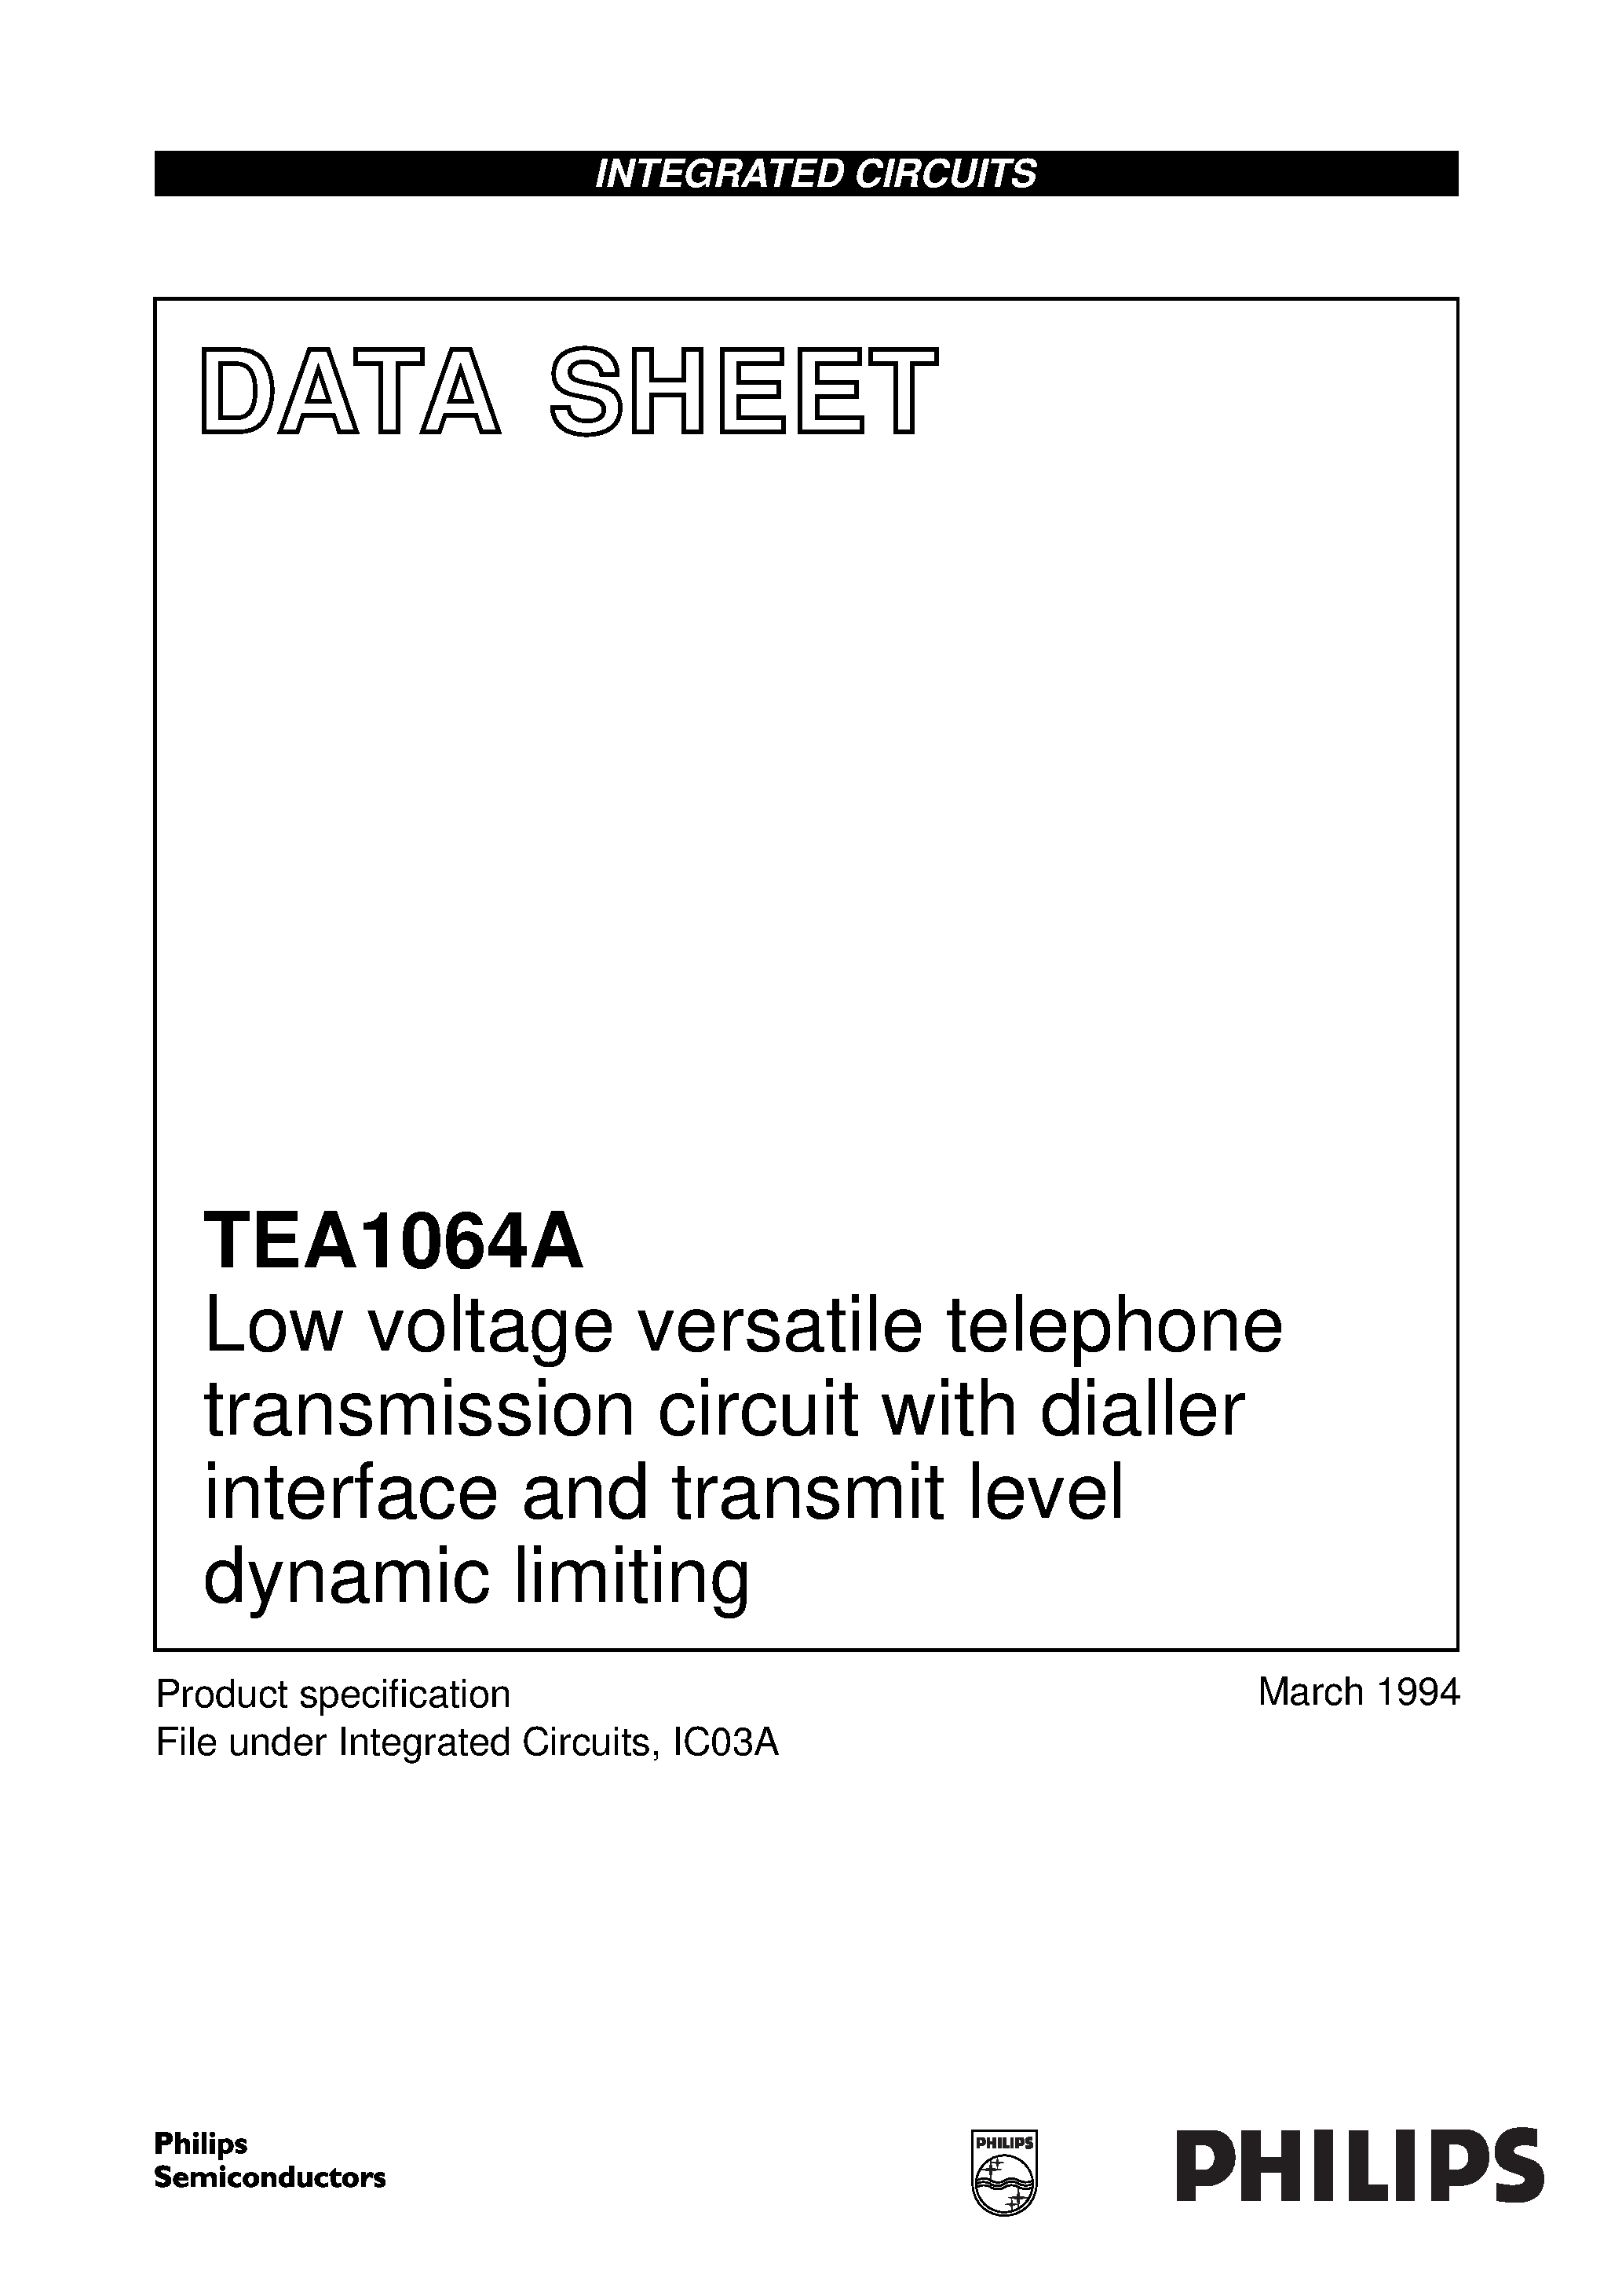 Datasheet TEA1064AT - Low voltage versatile telephone transmission circuit with dialler interface and transmit level dynamic limiting page 1